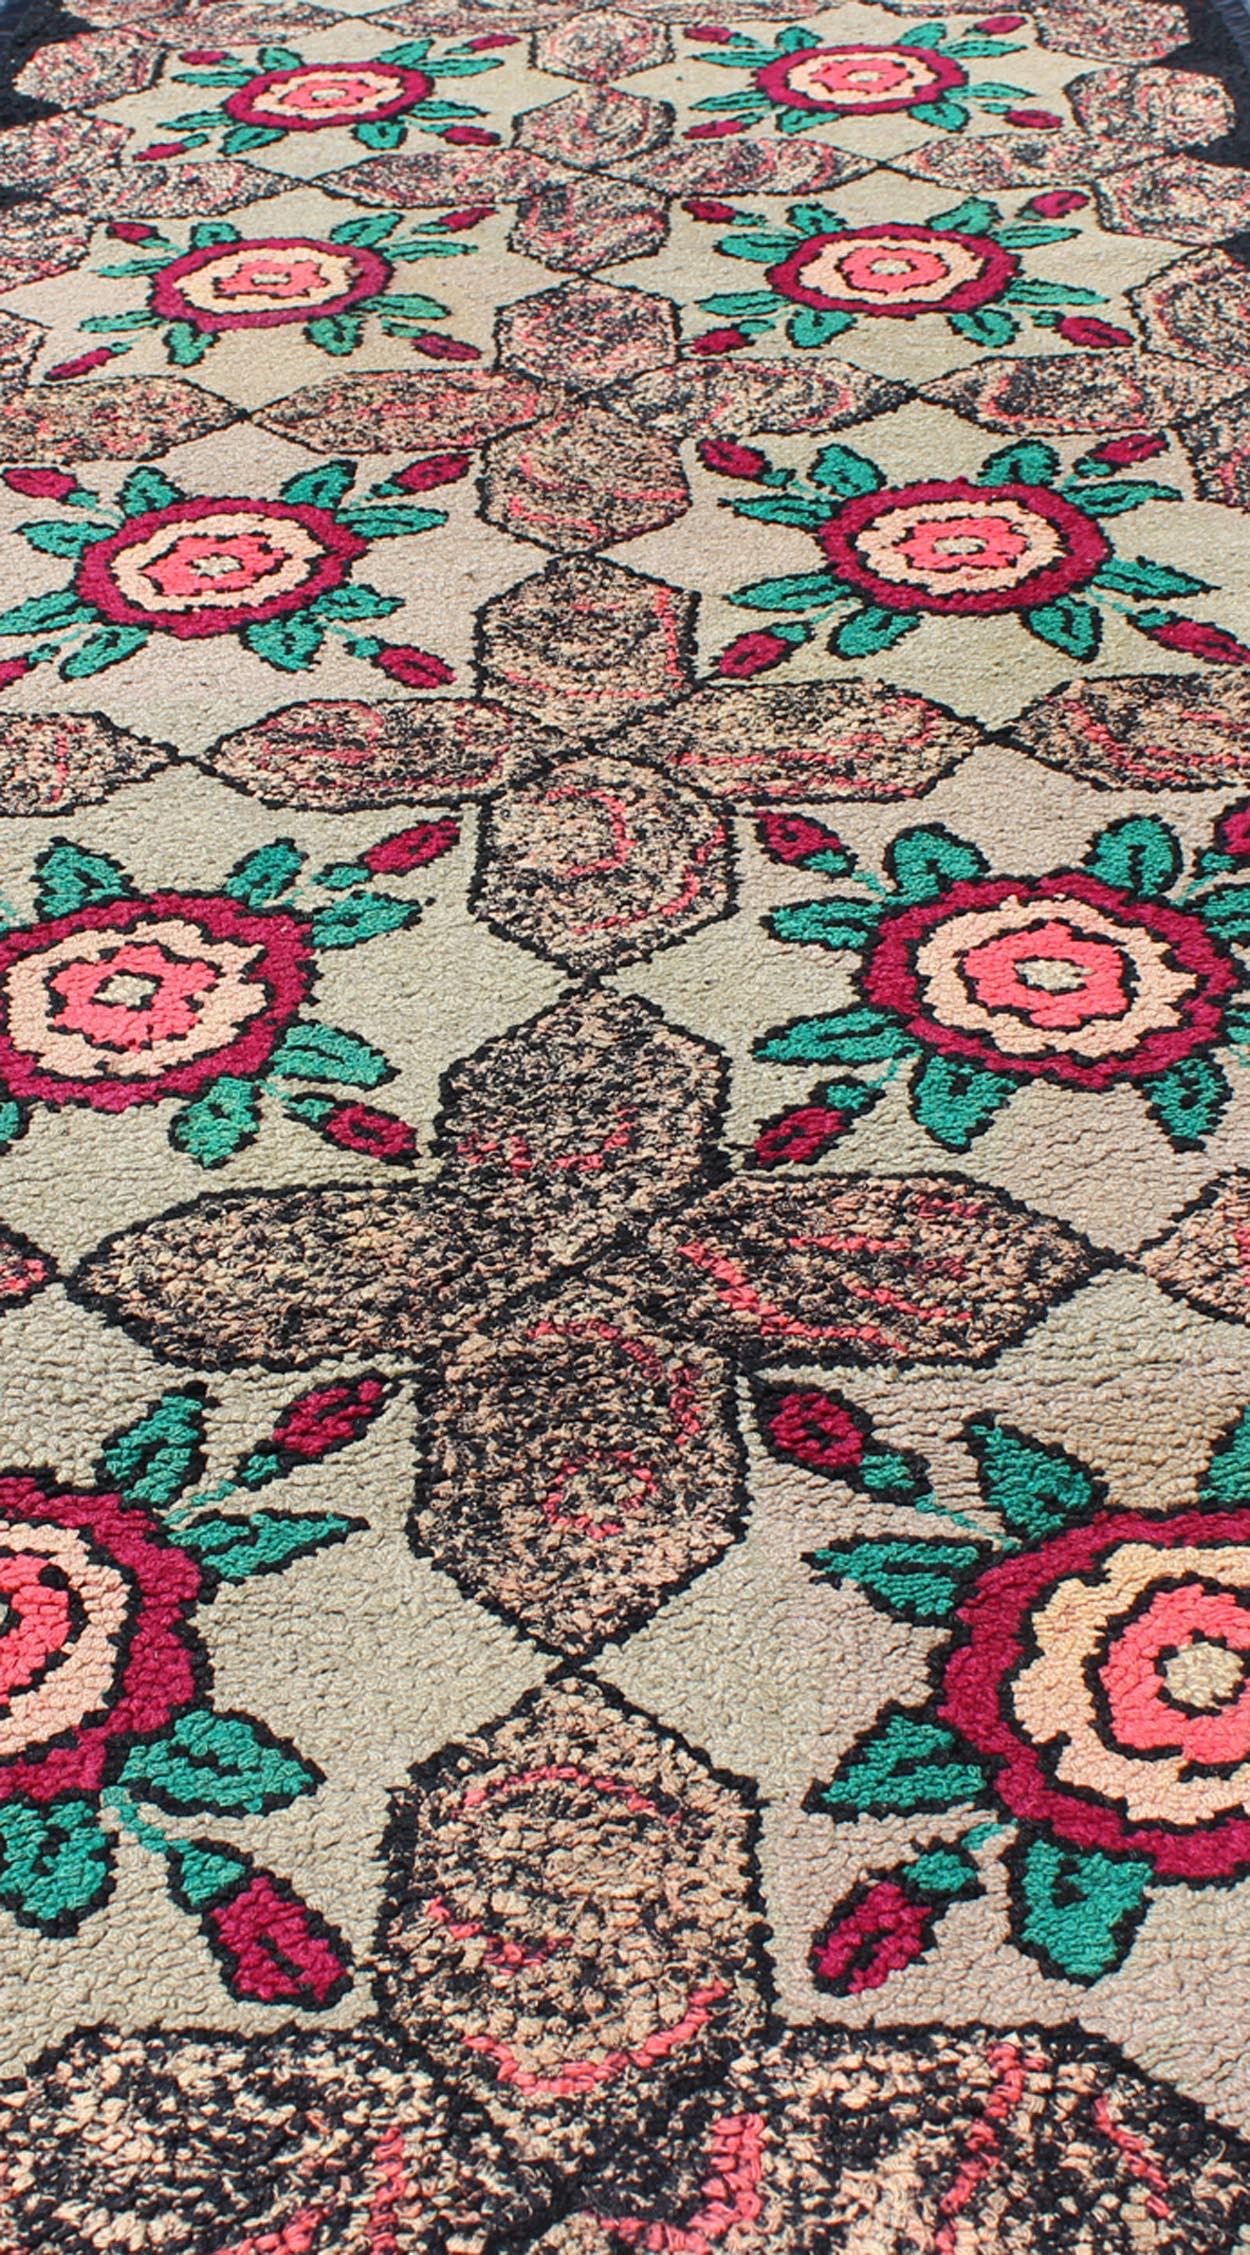 20th Century Repeating Floral-Leaf Design American Hooked Rug in Brown, Green, and Red For Sale